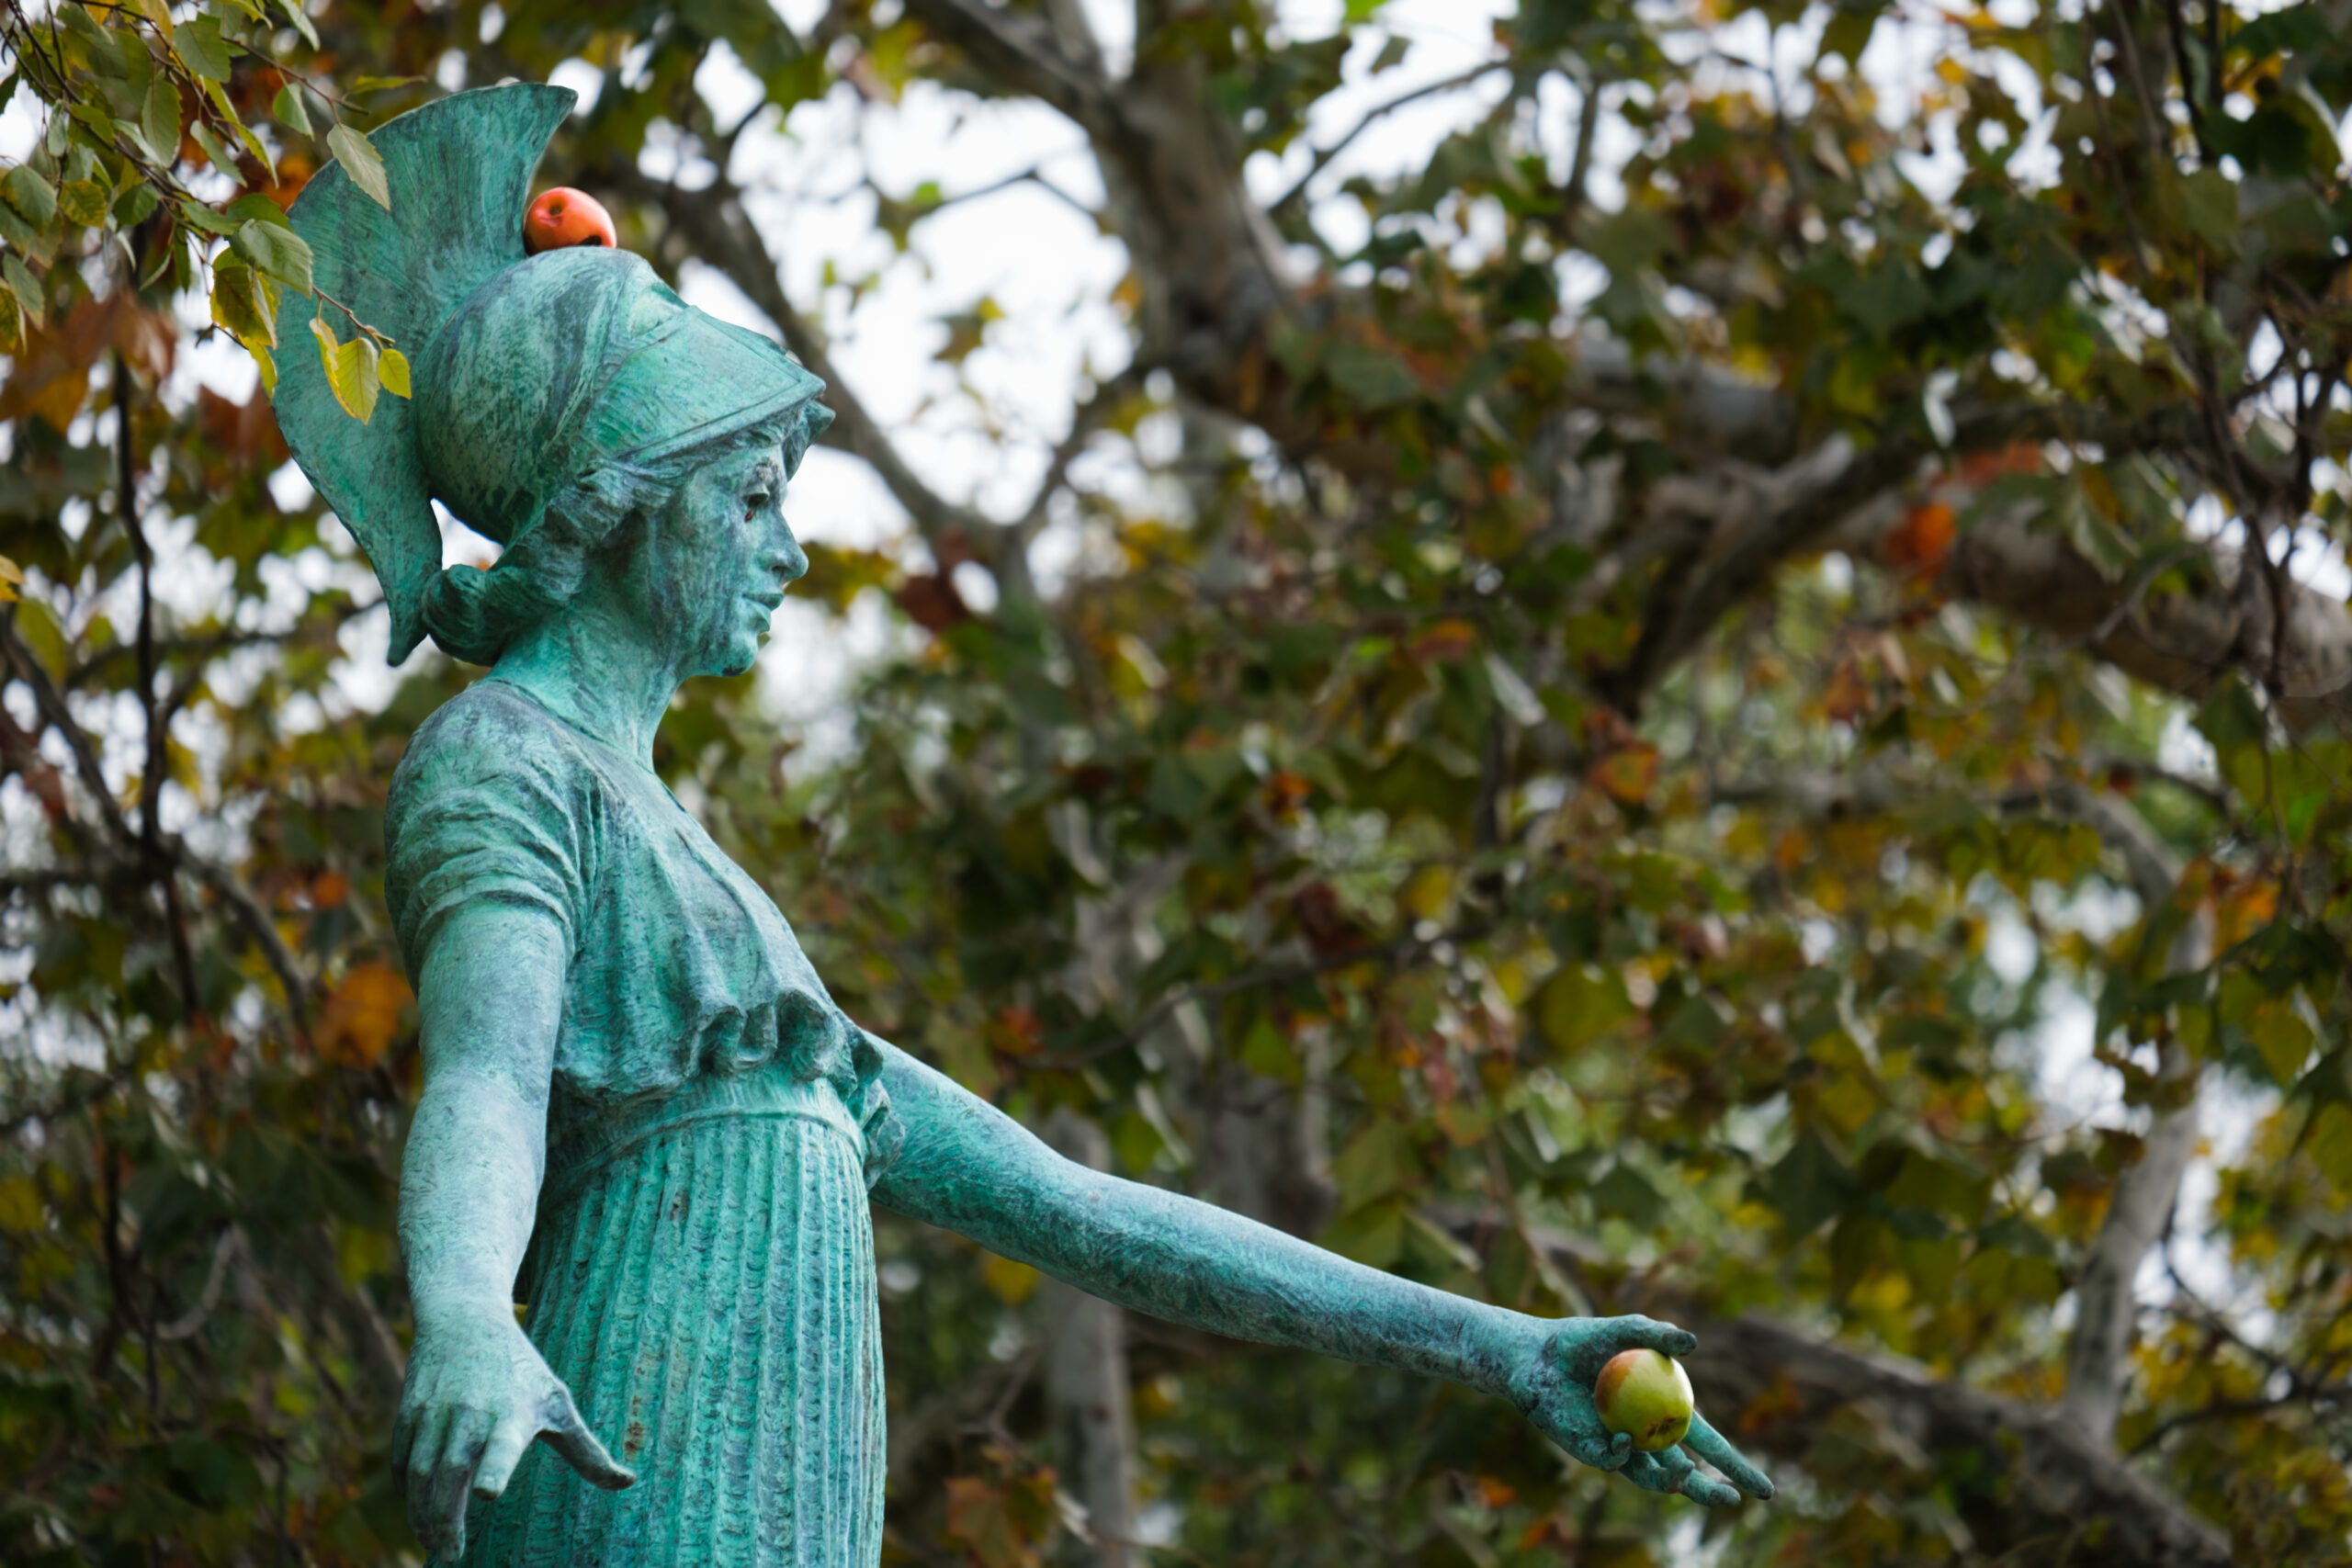 The UNCG Minerva statue holds an apple.